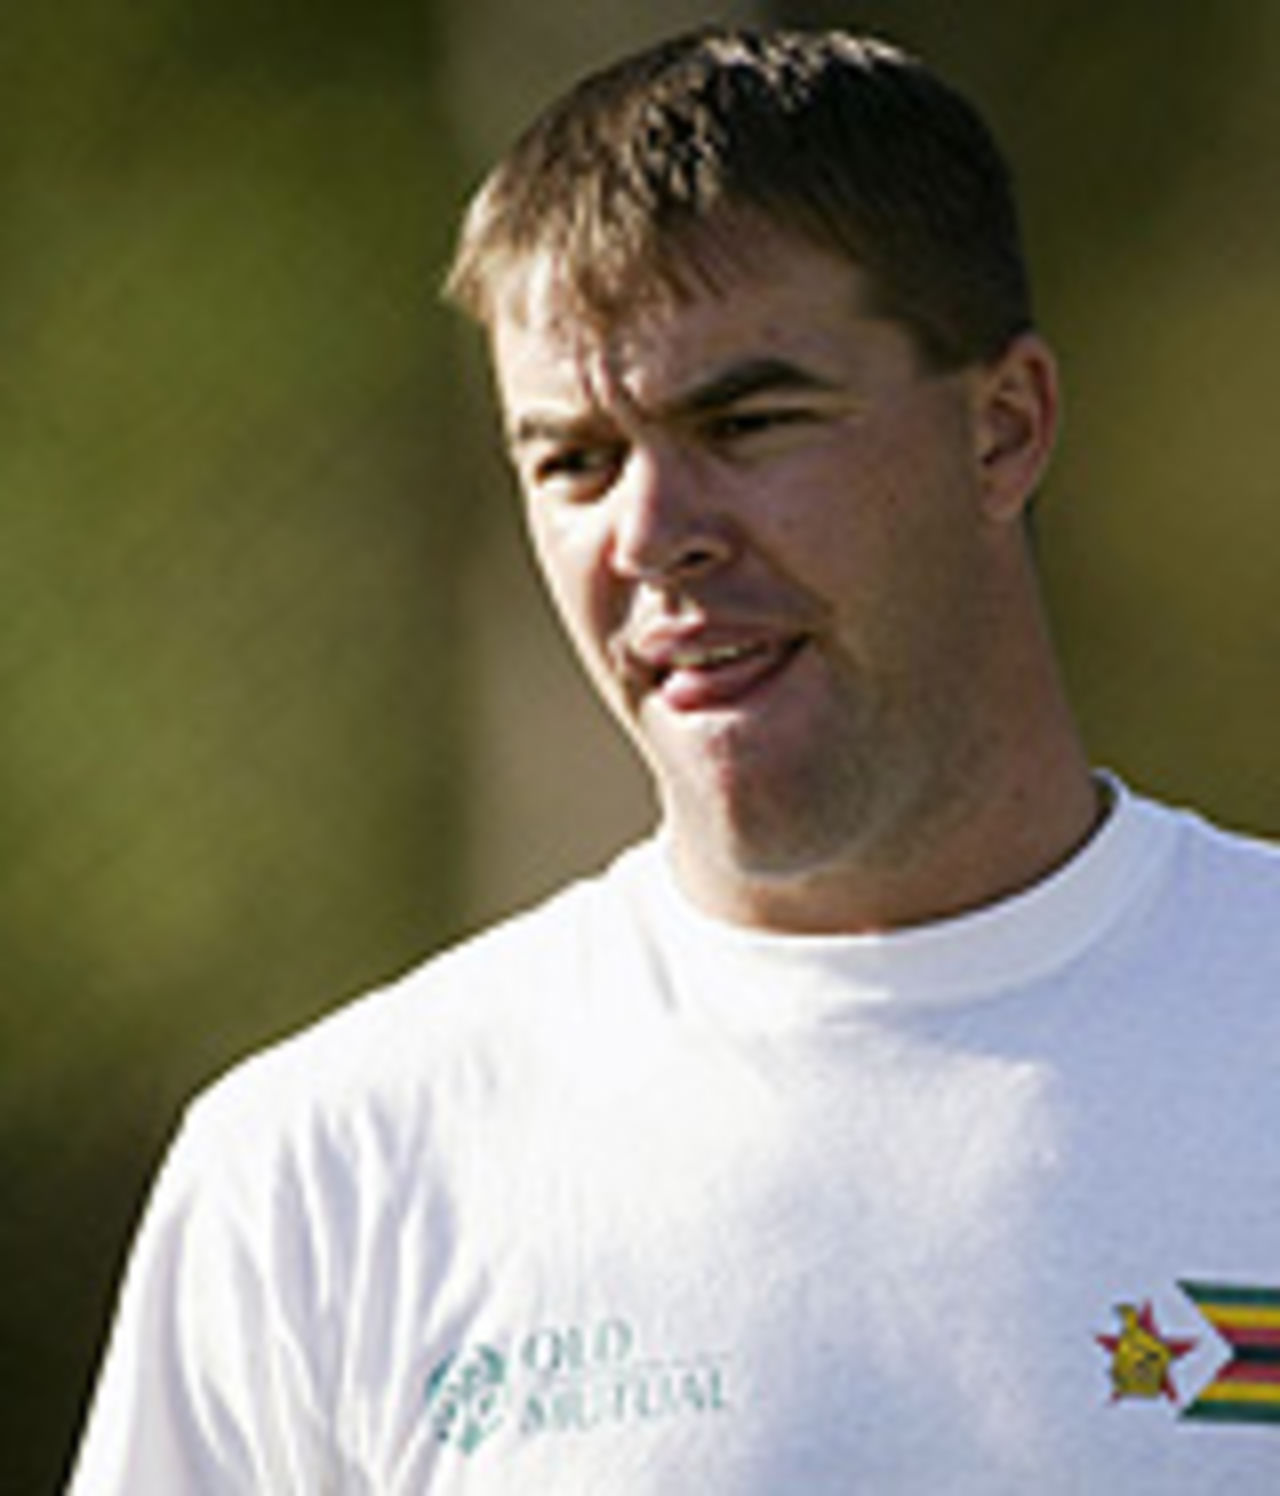 Heath Streak trains with the rebels, May 20, 2004